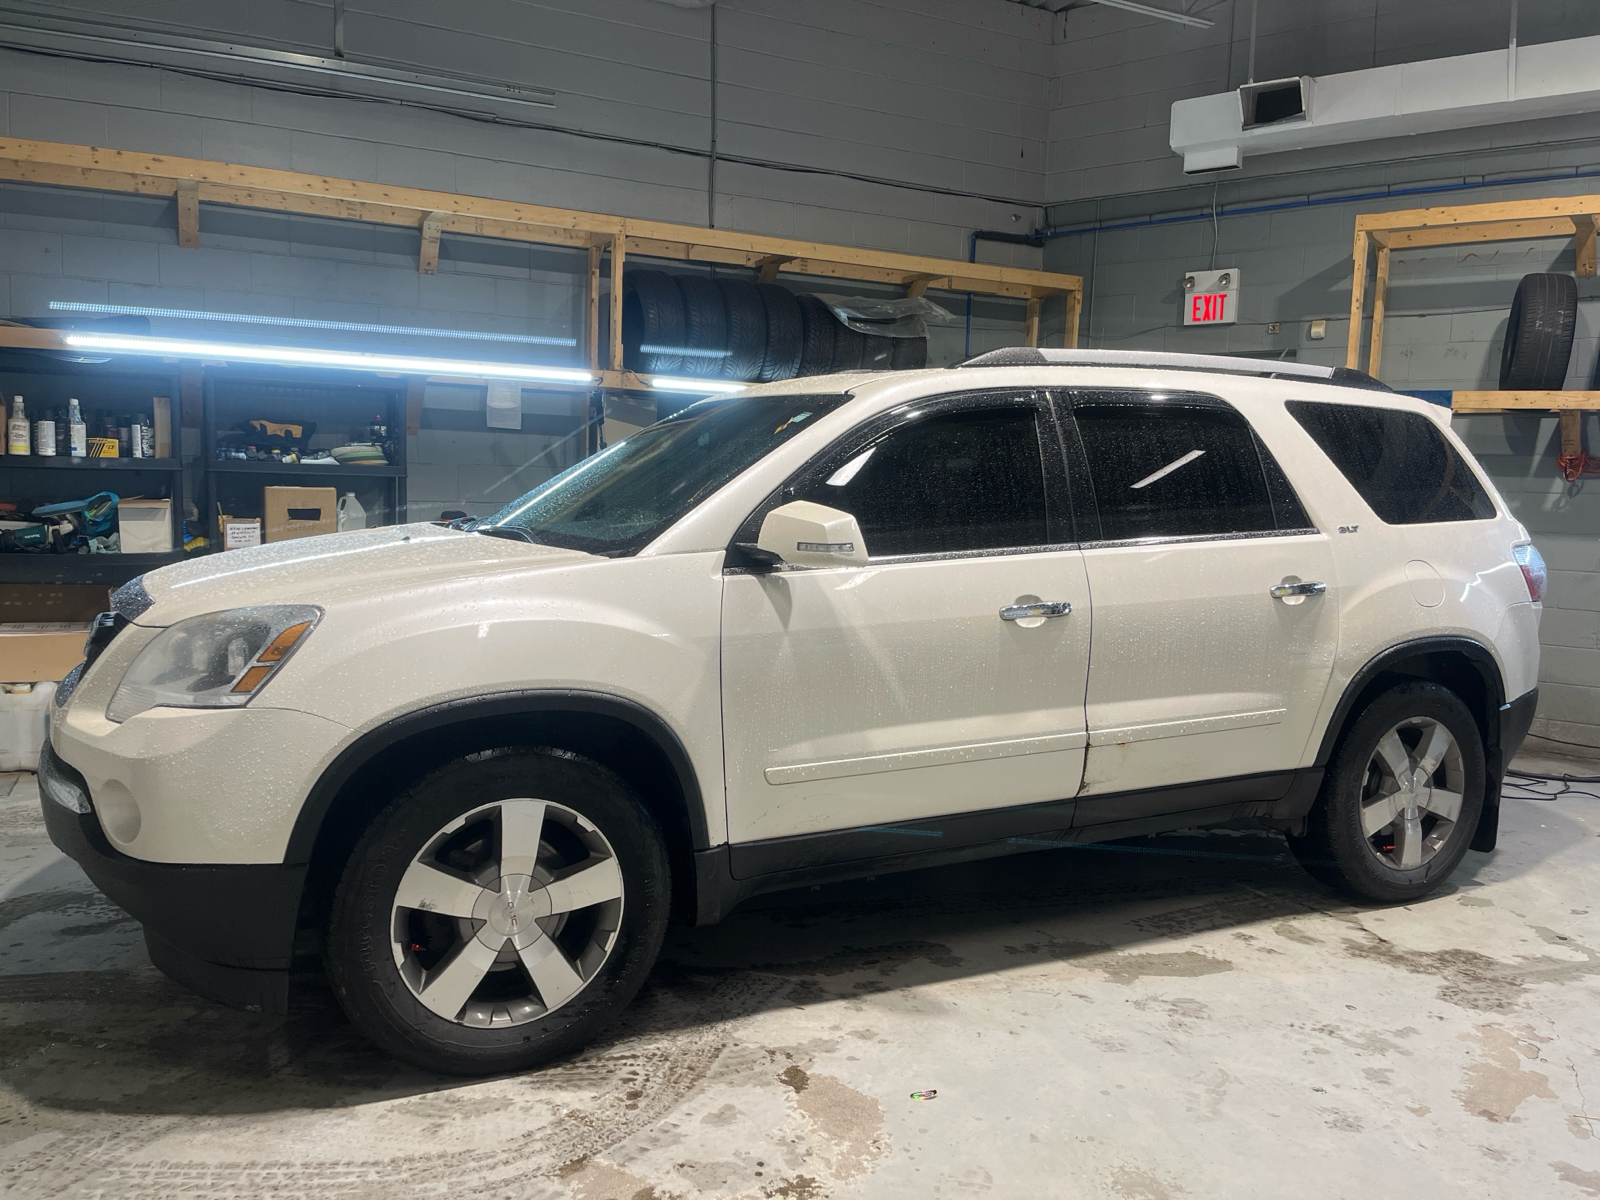 2011 GMC Acadia *** AS-IS SALE *** YOU CERTIFY & YOU SAVE!!! *** 7